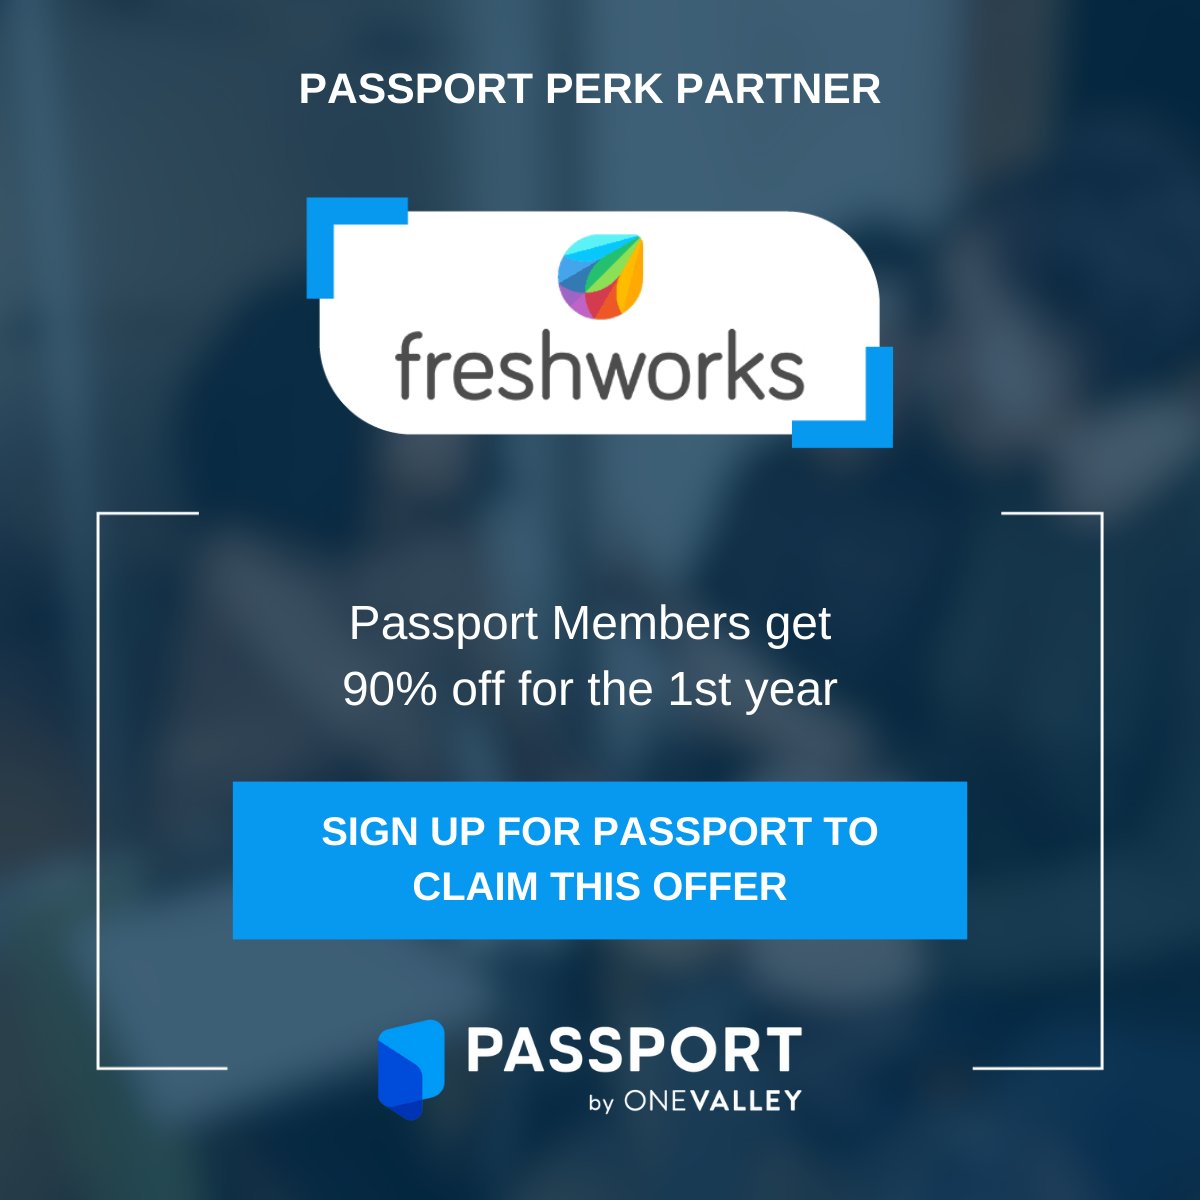 Attention #startups! Keep your customers happy and your business growing with @FreshworksInc. Passport members get exclusive access to their suite of powerful customer engagement software tools. Learn more about this exciting Passport Perk Partner: hubs.ly/Q02bHJsg0